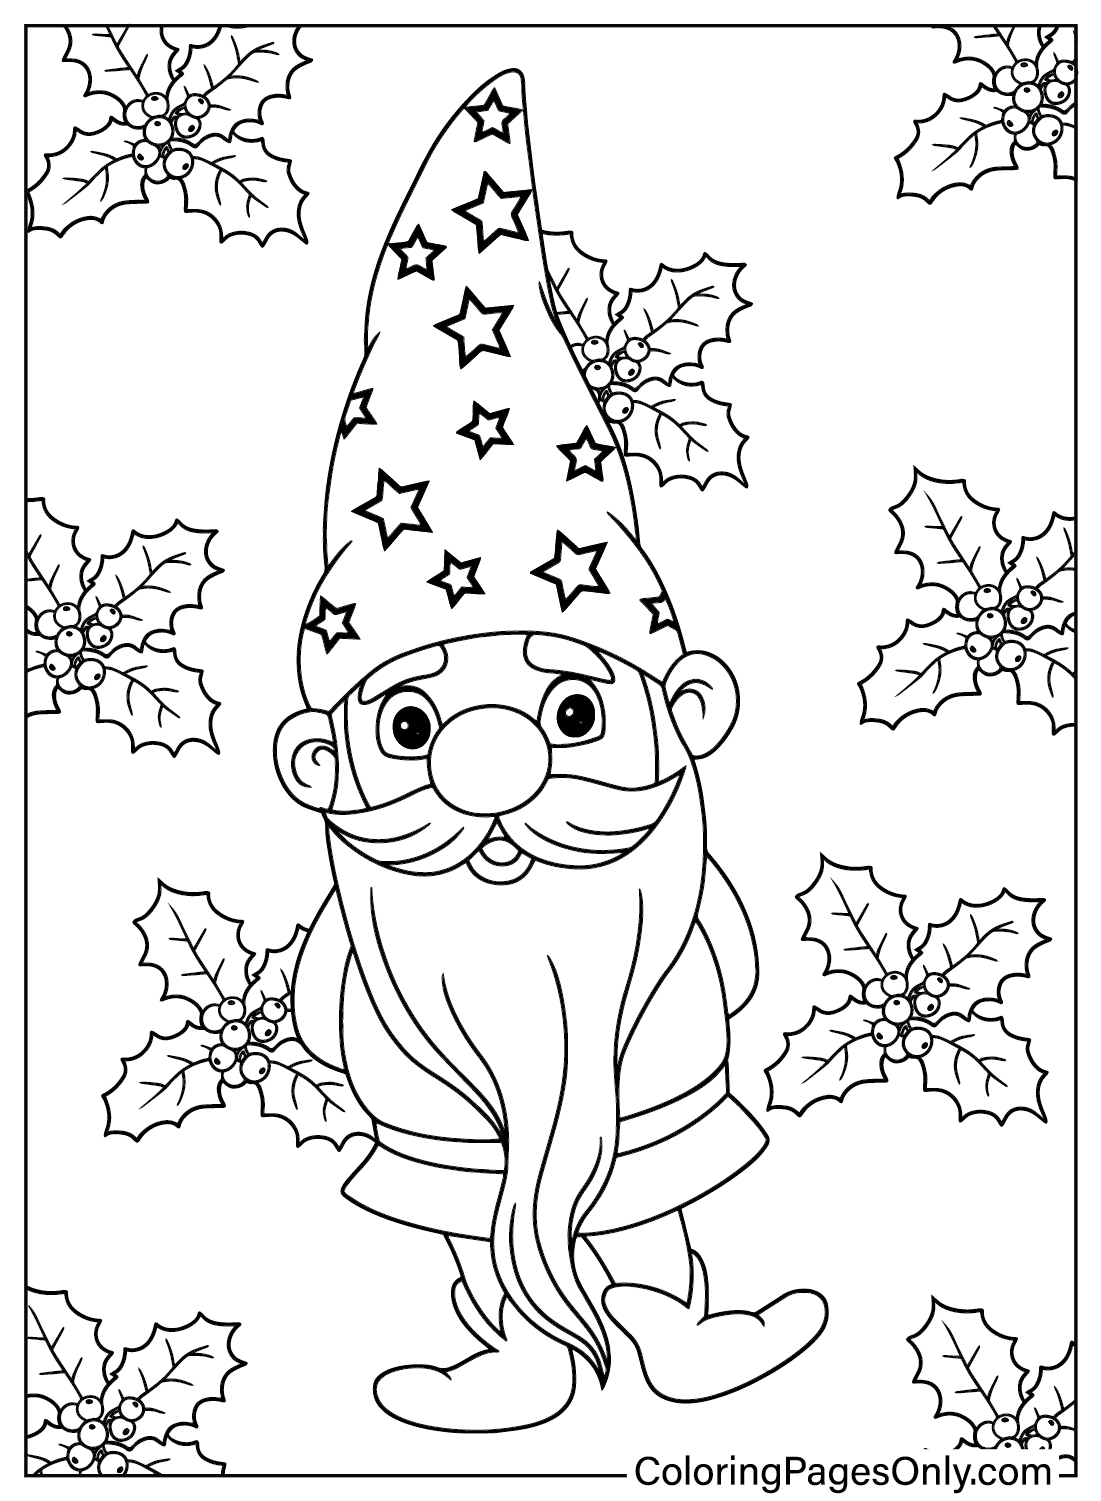 Gnome Coloring Pages Free Printable Coloring Pages